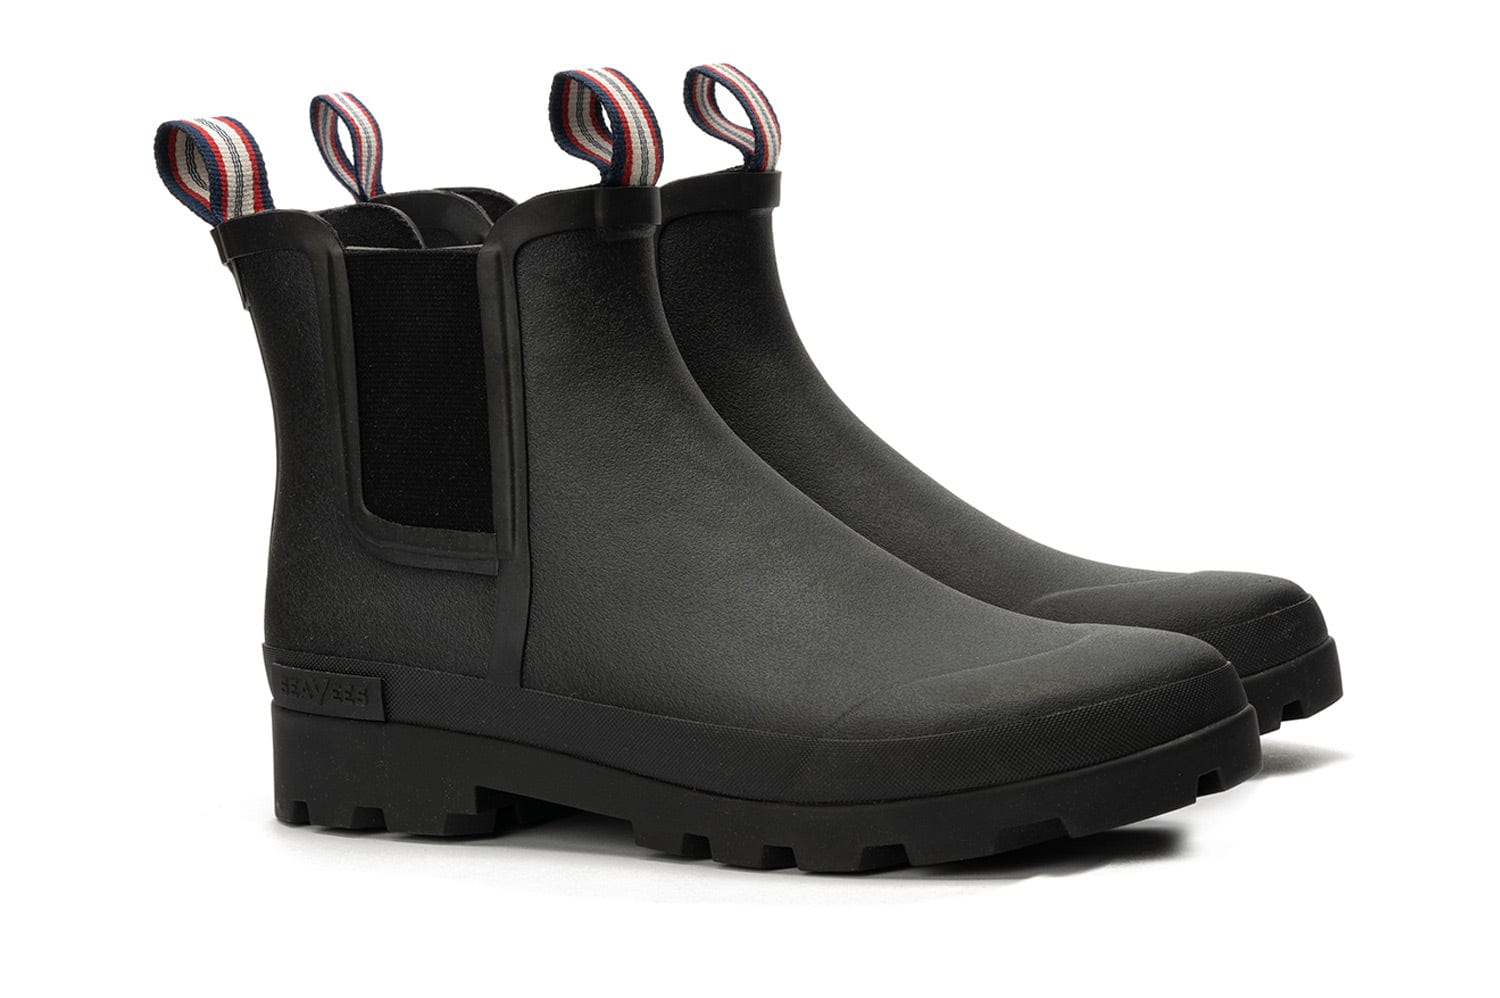 Angle view of the Bolinas Off Shore Boot in Black showing elastic sides and sturdy sole.